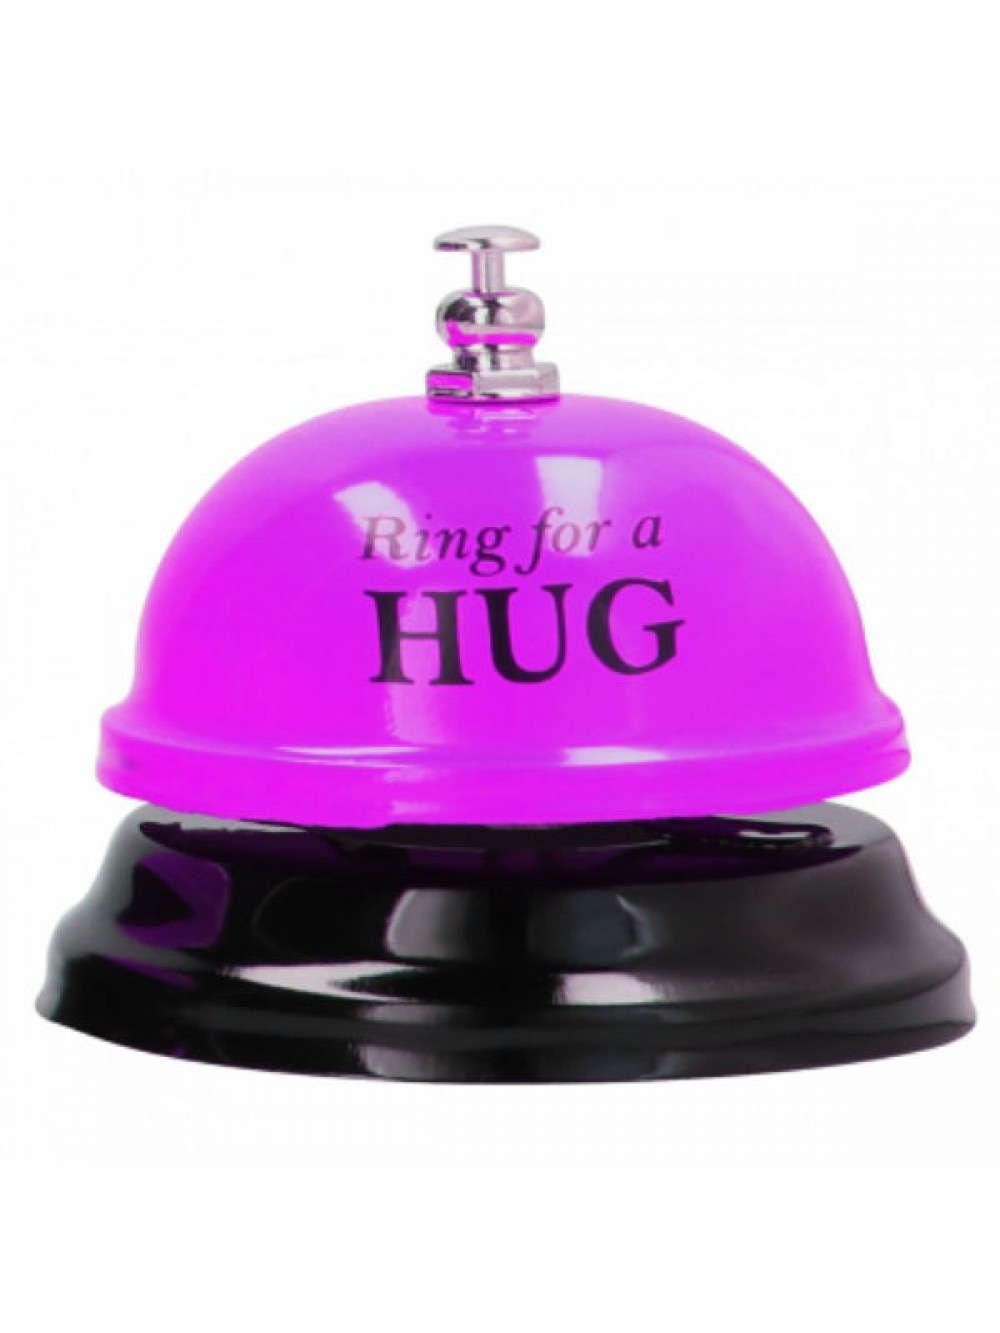 RING FOR A HUG HOTEL BELL PURPLE 8714273940186